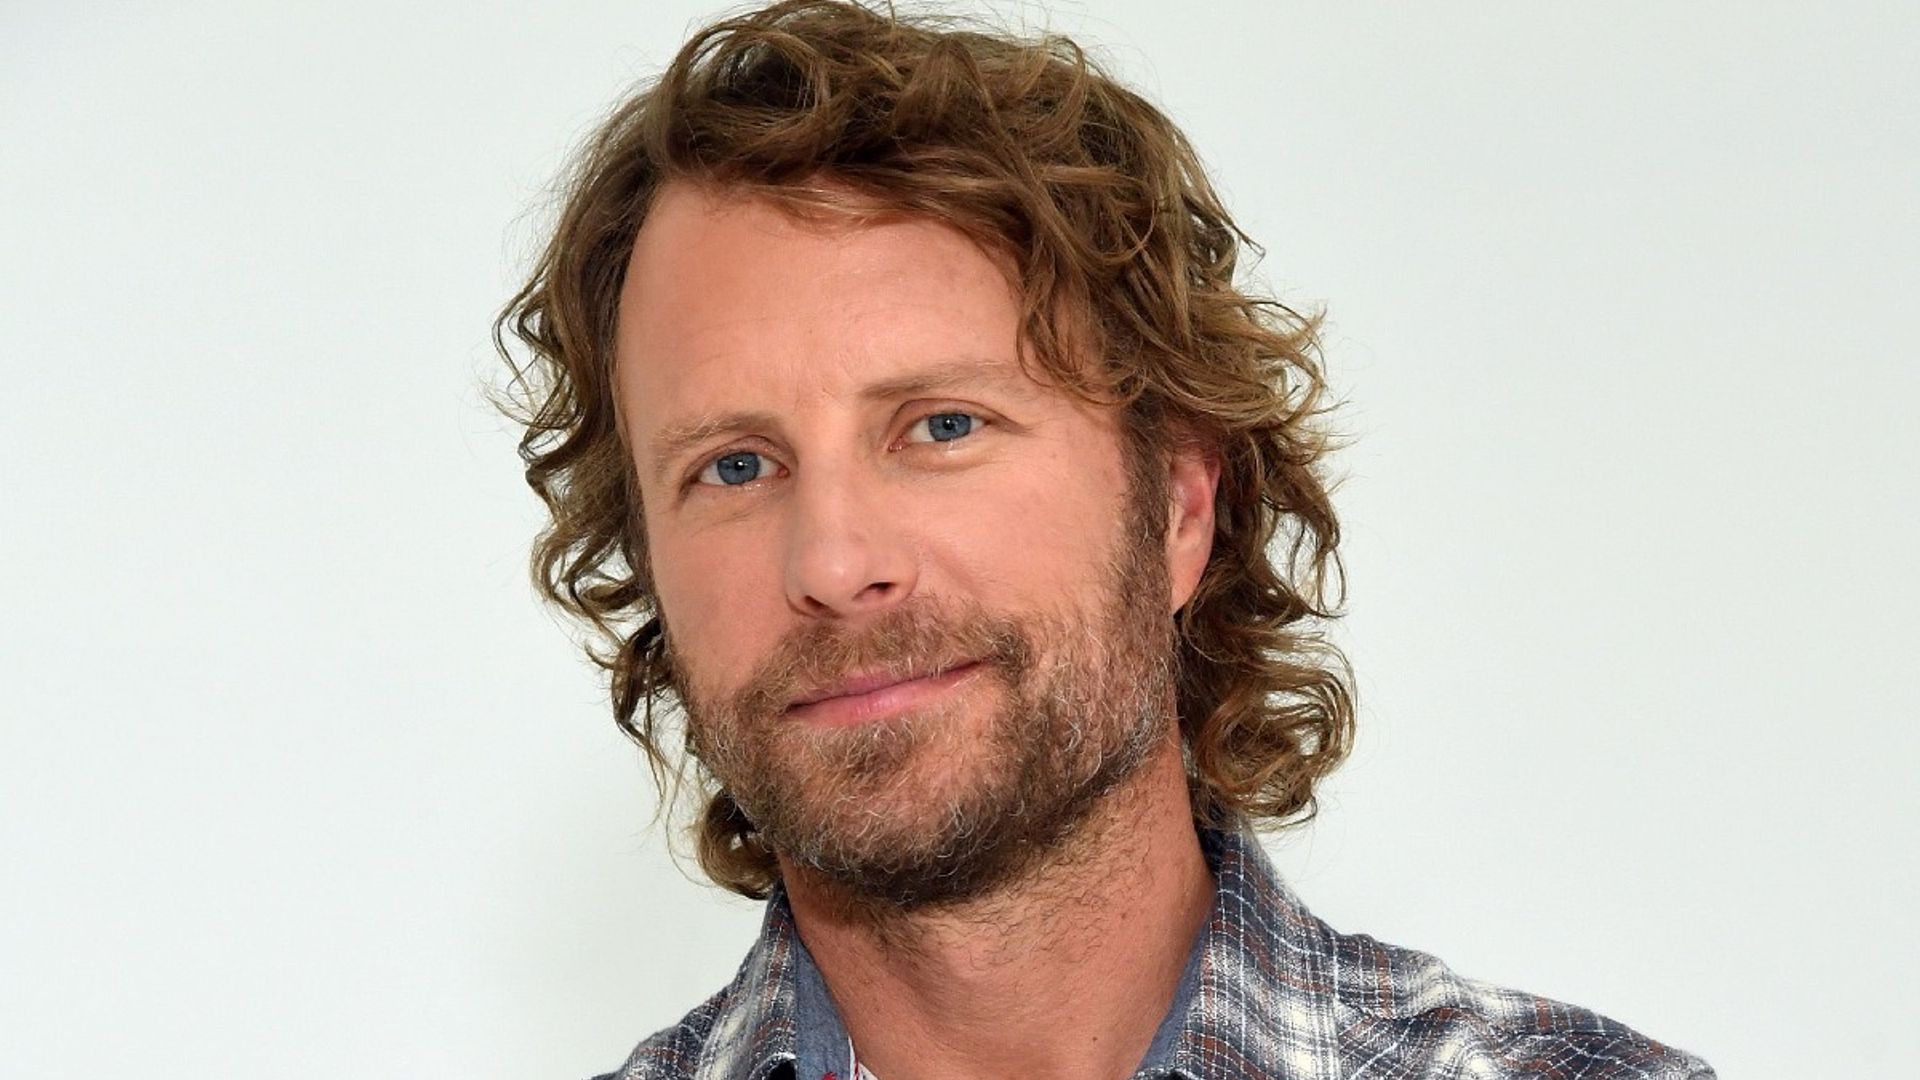 Dierks Bentley named one of four musicians to be inducted into Nashville's Music City Walk of Fame